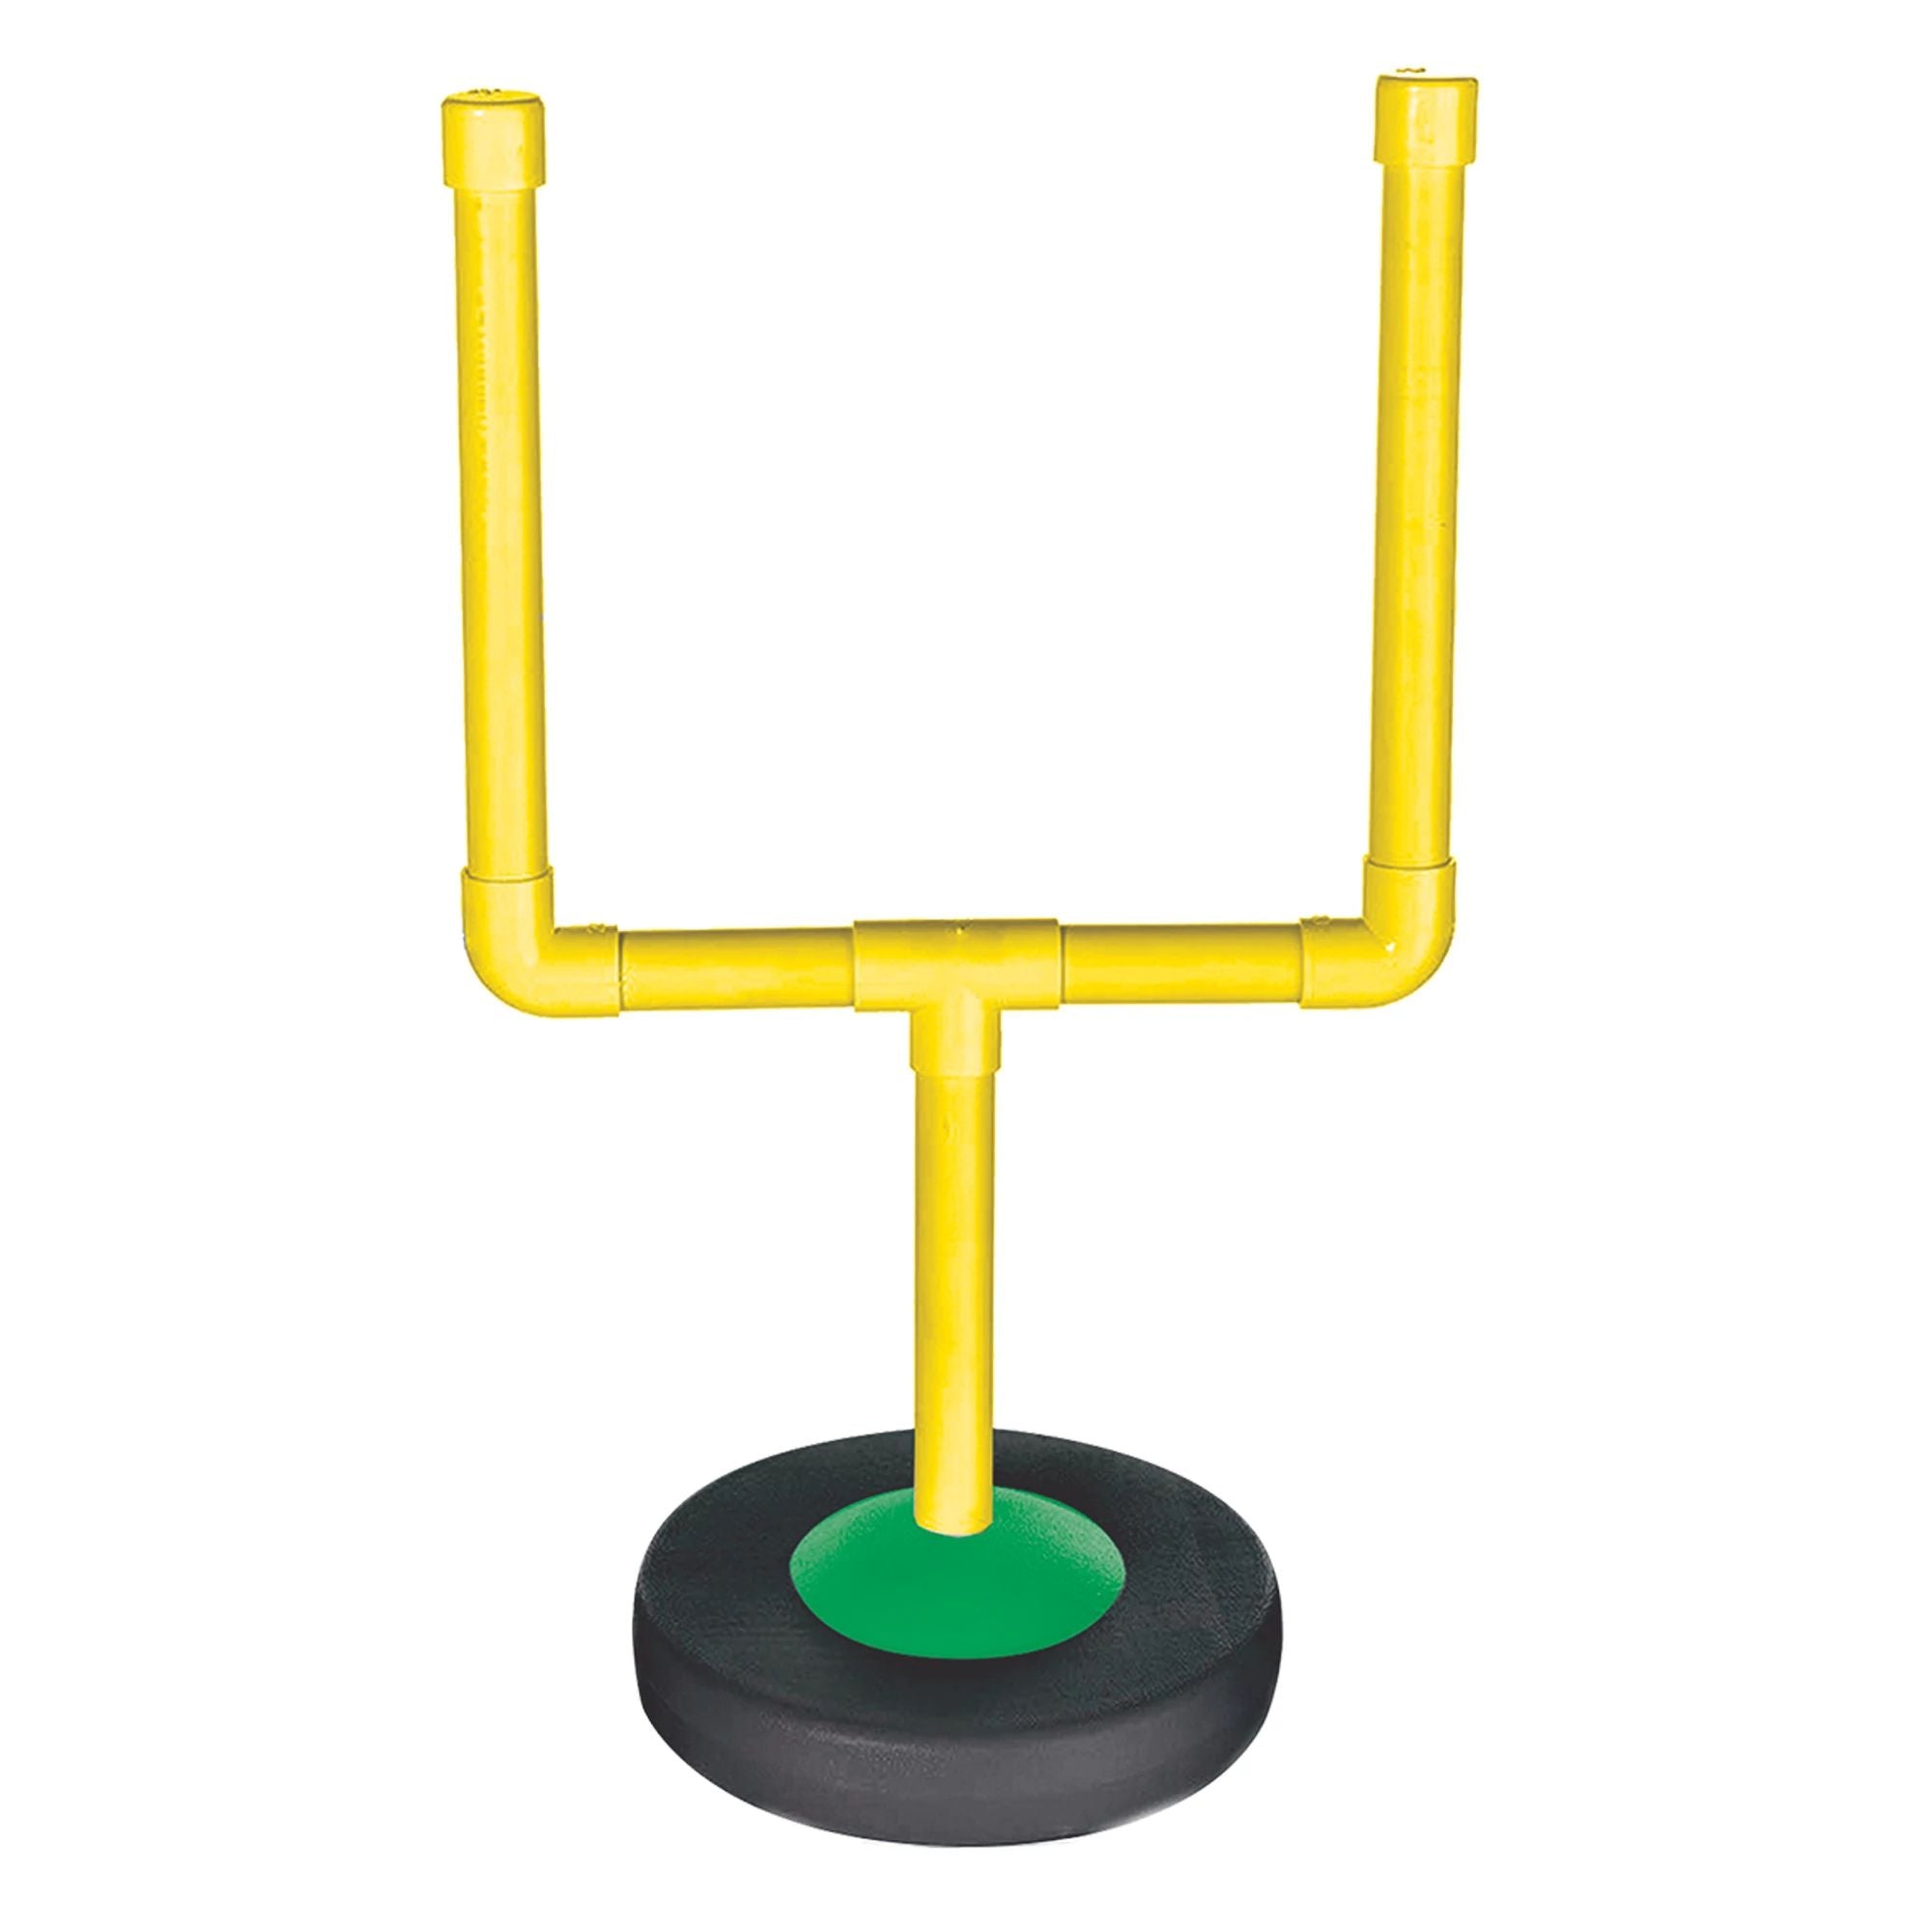 Ultimate Party Super Stores Football Goal Centerpiece - Plastic